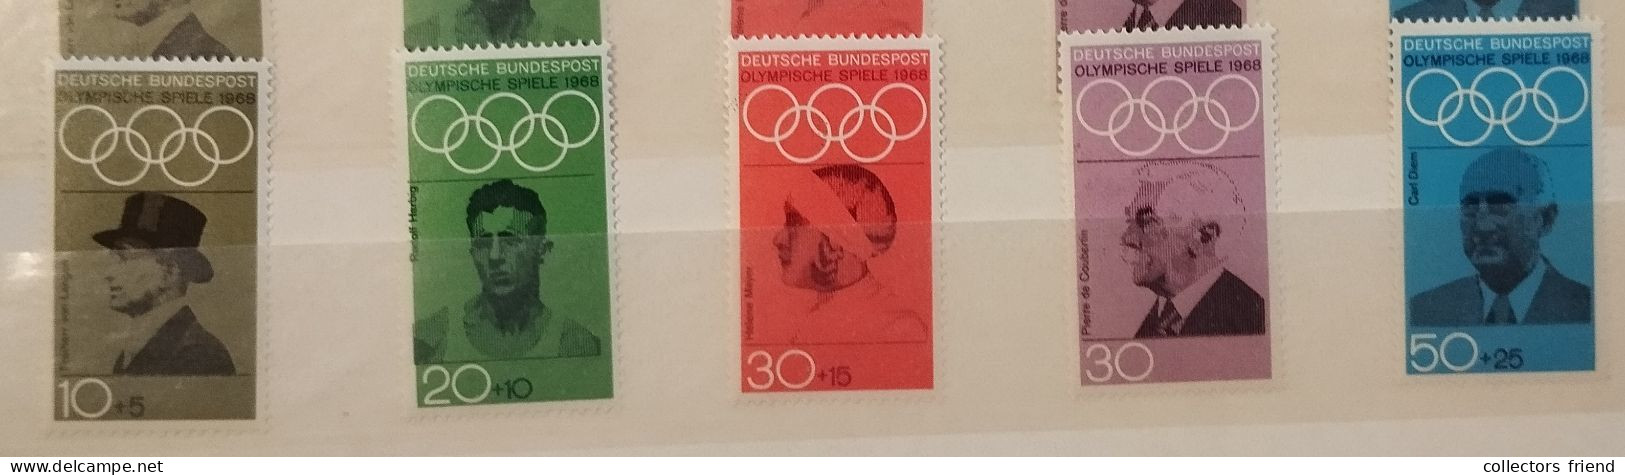 Germany - Olympia Olimpiques Olympic Games - Mexiko Mexico '68 - MNH** - Estate 1968: Messico